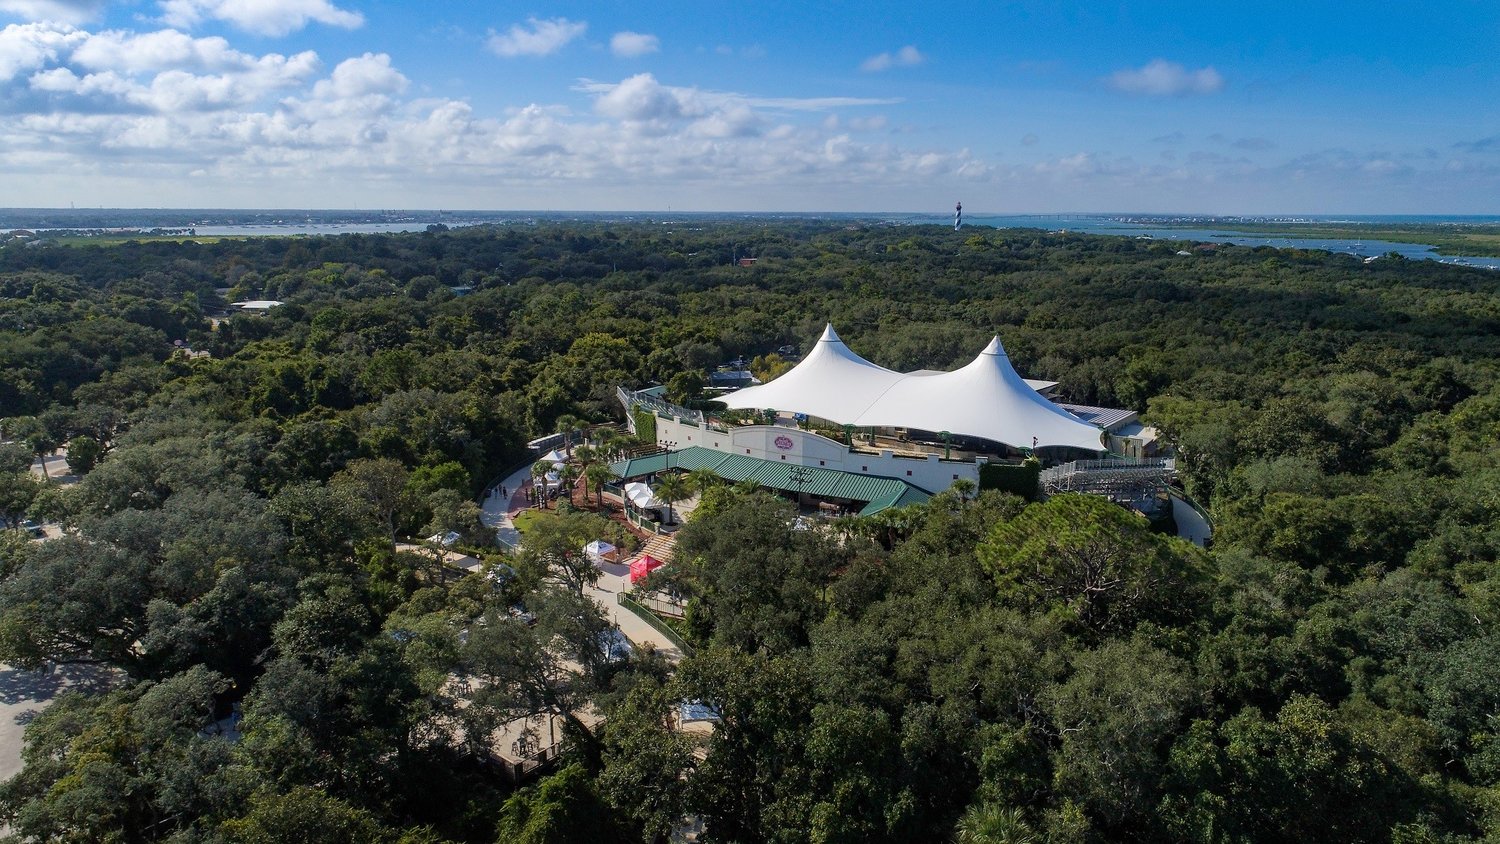 The St. Augustine Amphitheatre seen from the air.